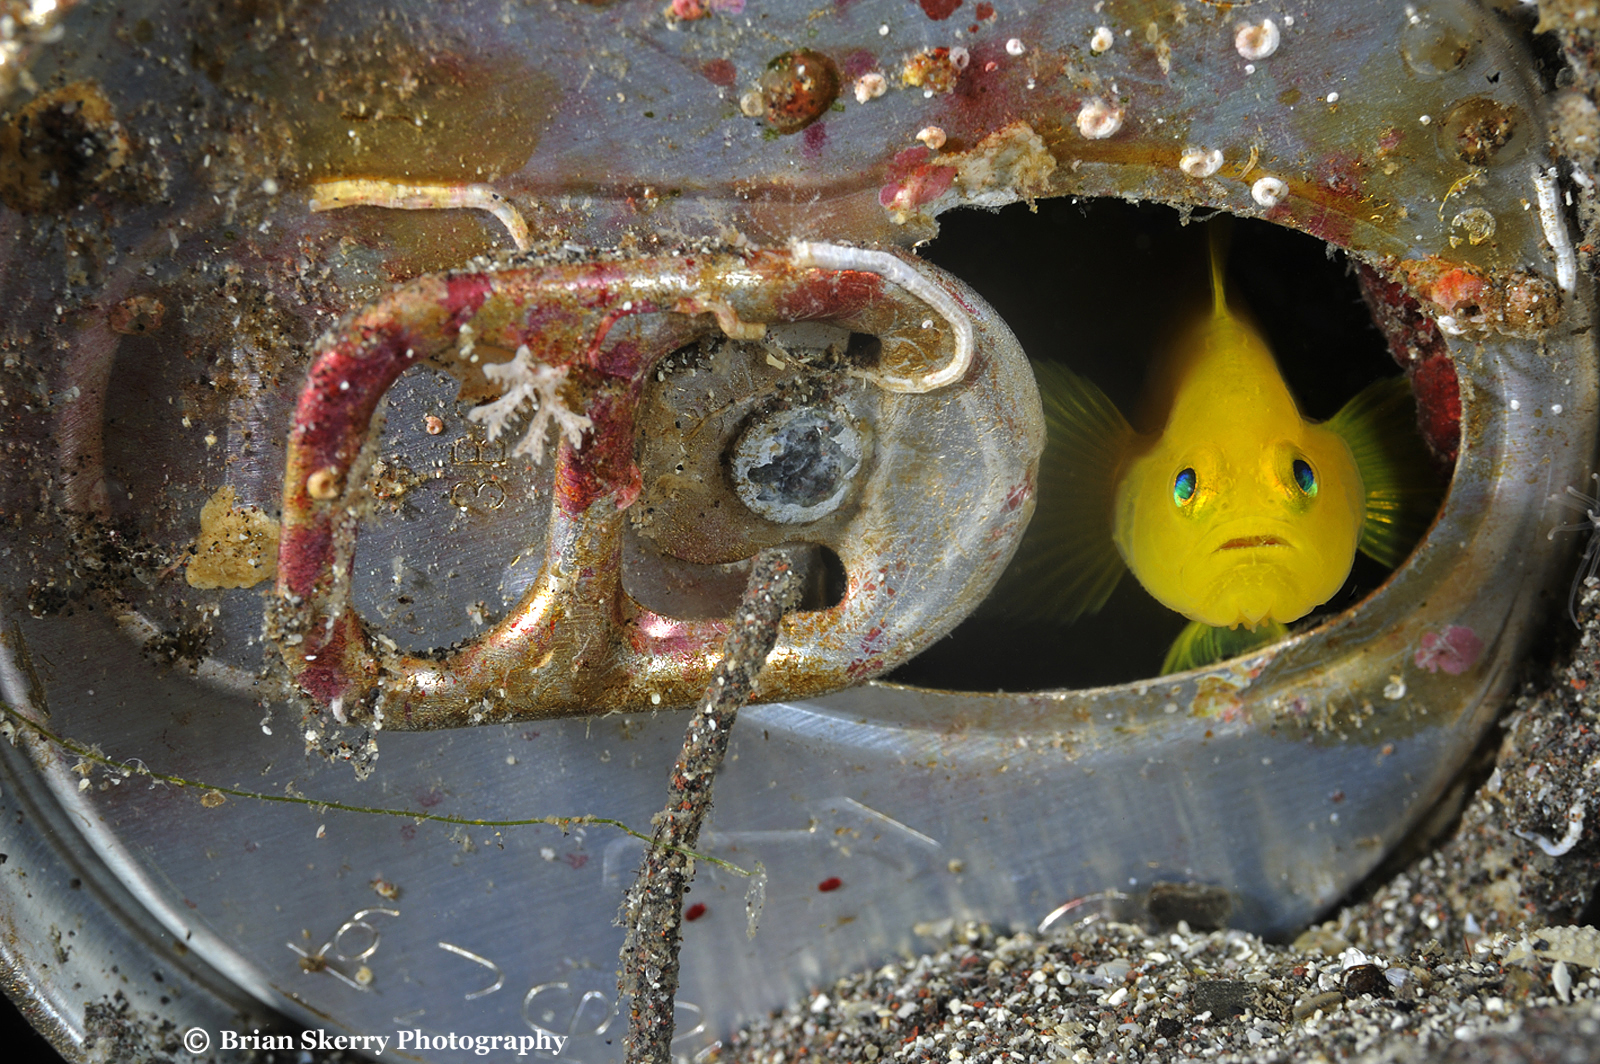 Gobi in a can by Brian Skerry